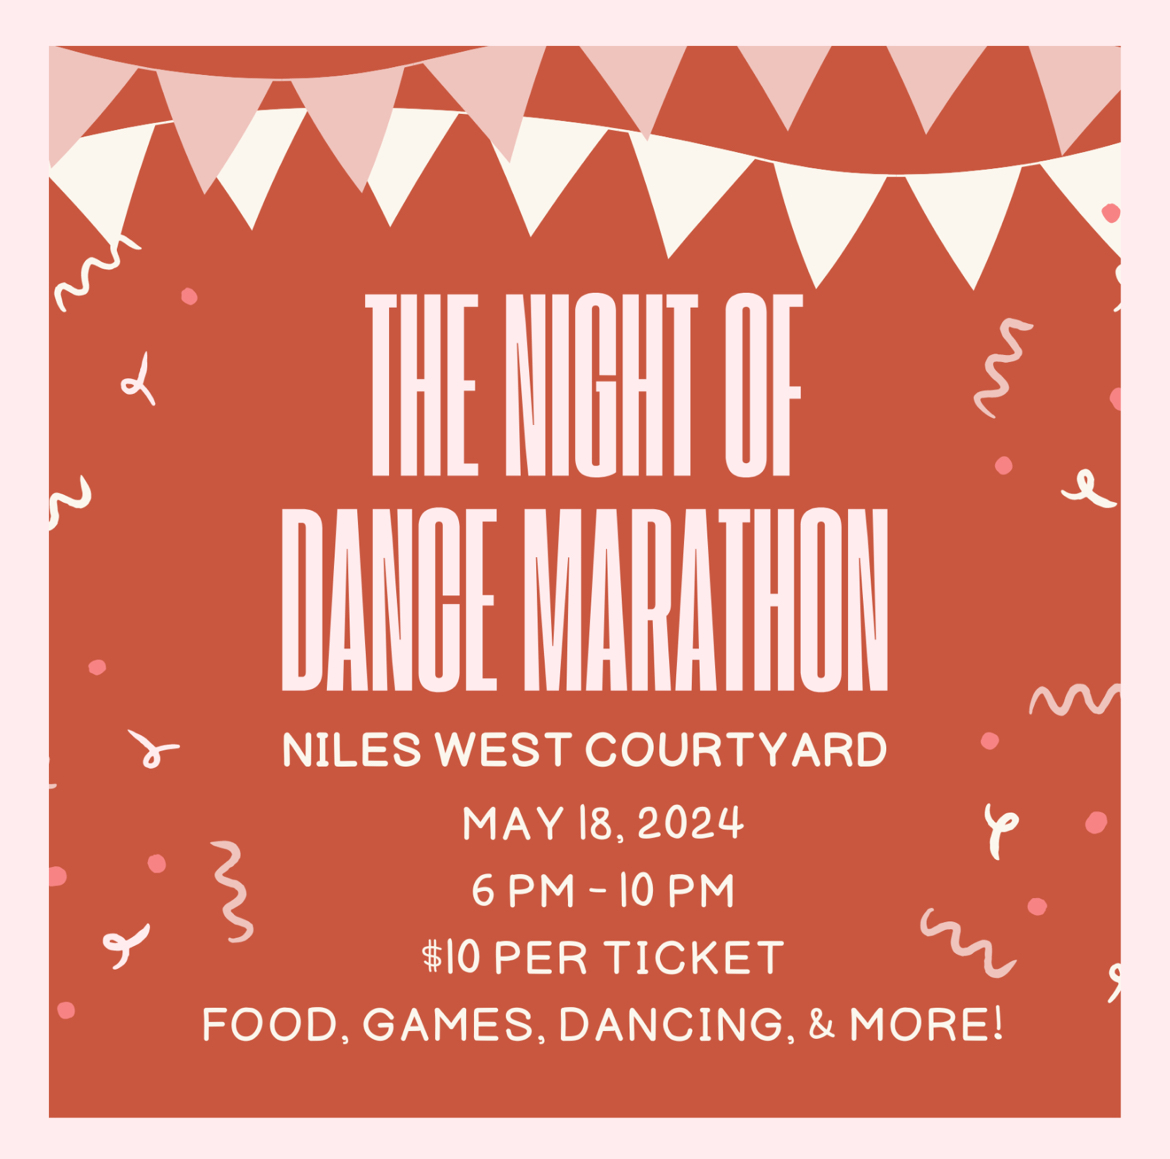 Dance Marathon celebrates its annual Night of celebration this Saturday May 18 in Niles Wests courtyard.